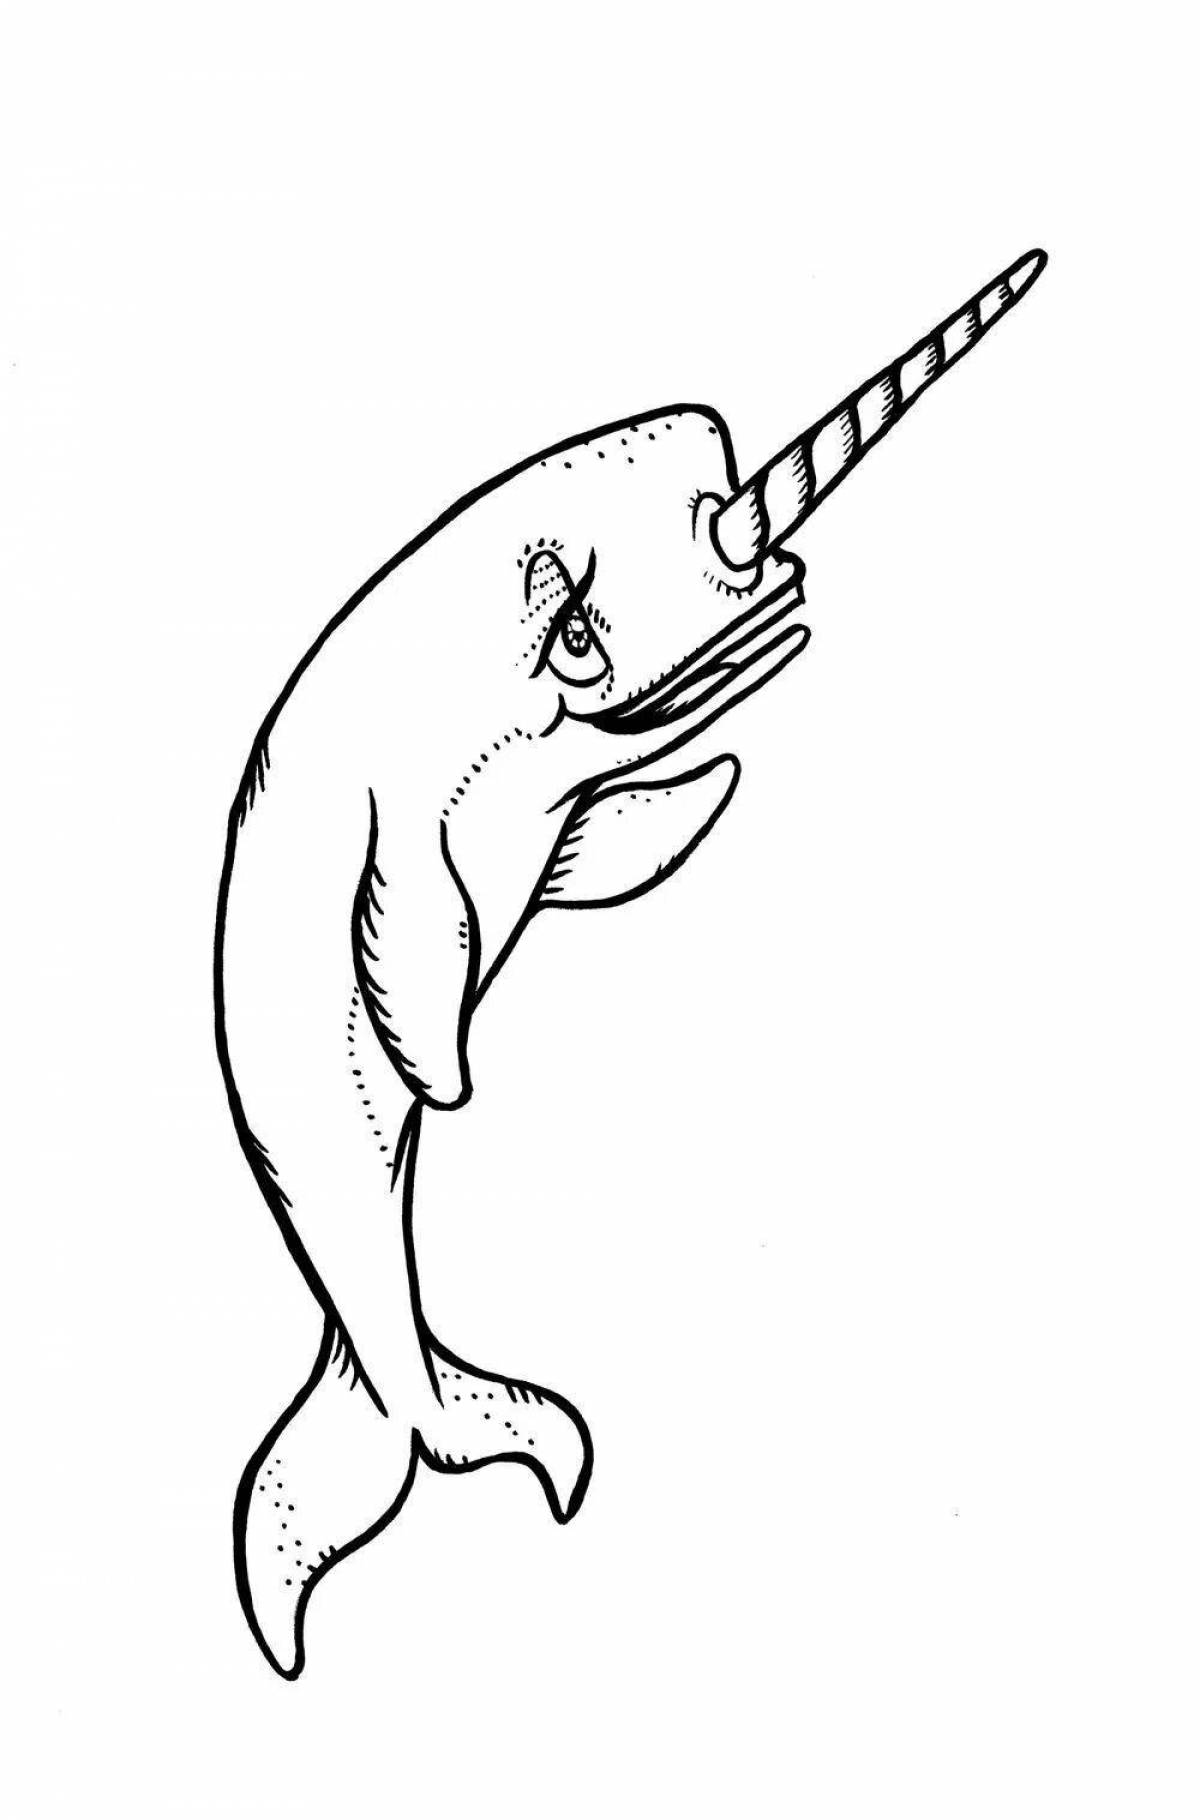 Joyful narwhal coloring book for kids